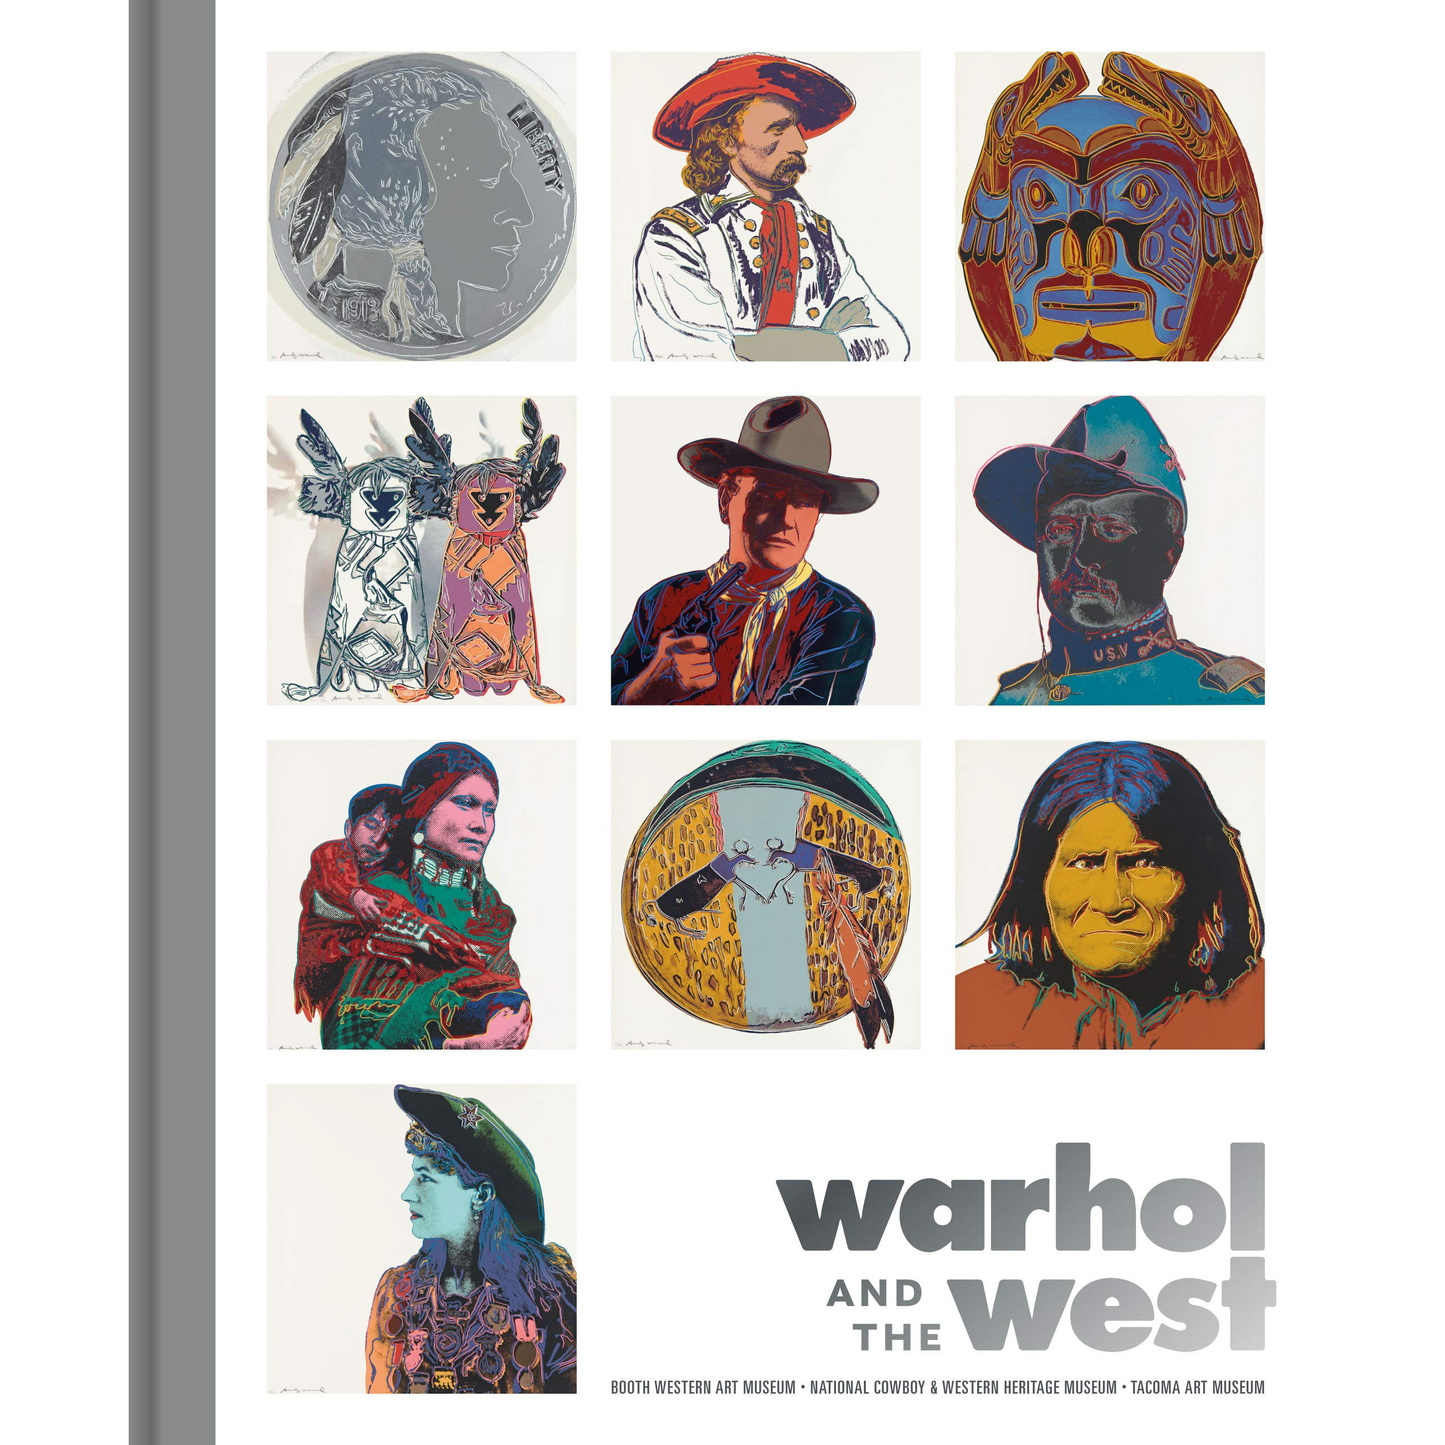 Warhol and the West